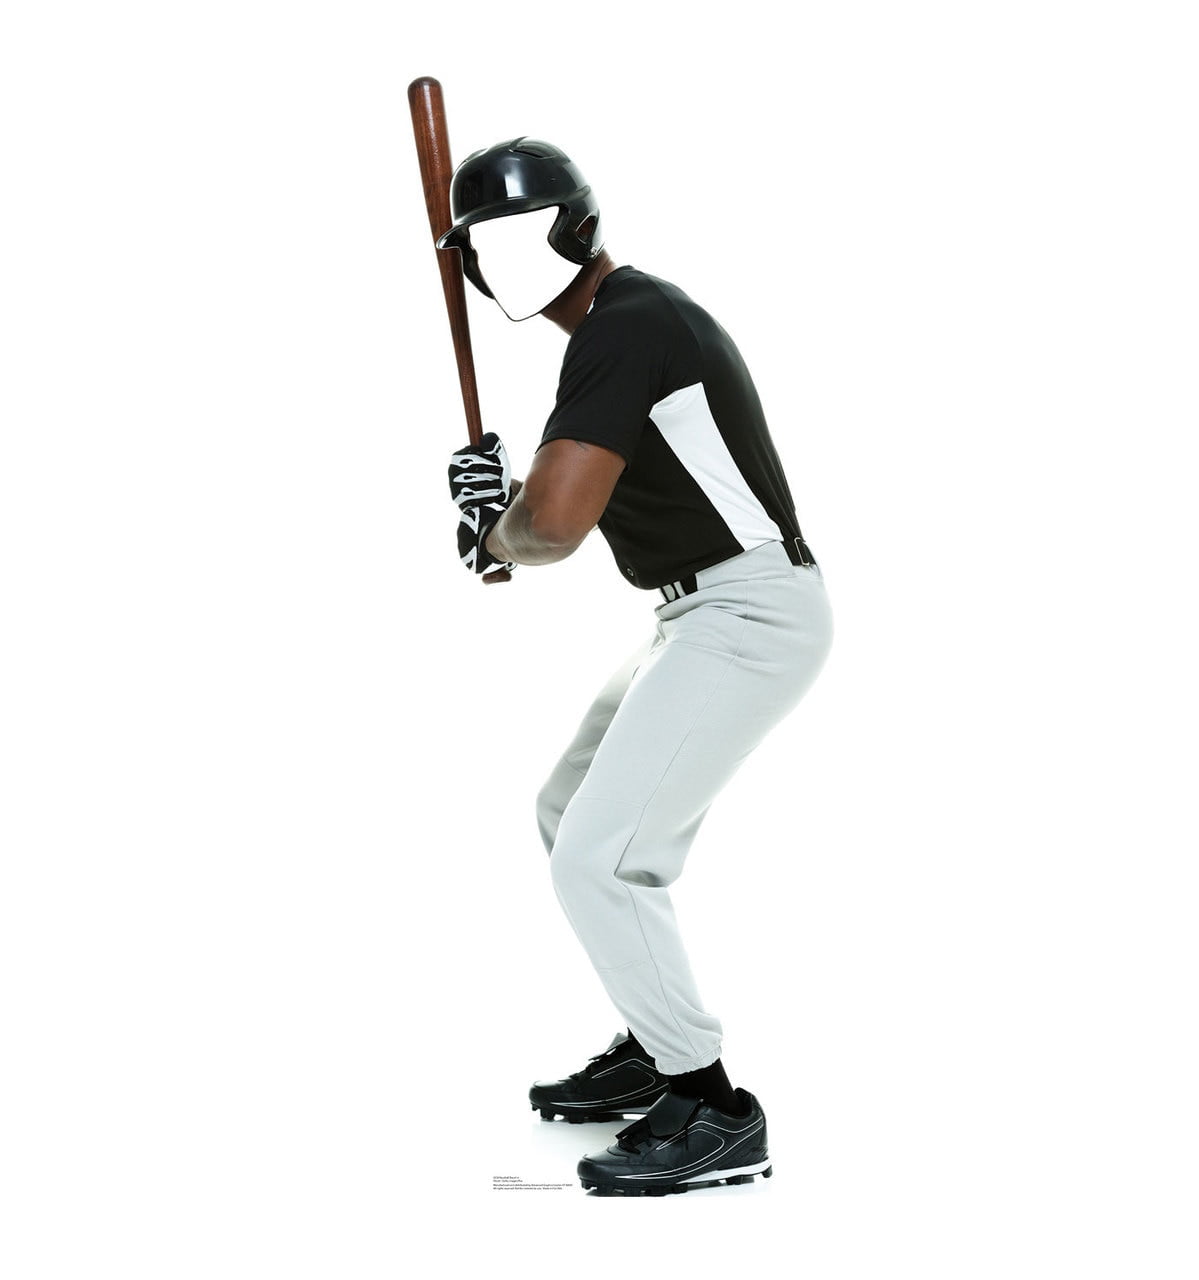 Picture of Advanced Graphics 2628 68 x 26 in. Baseball Player Stand-in